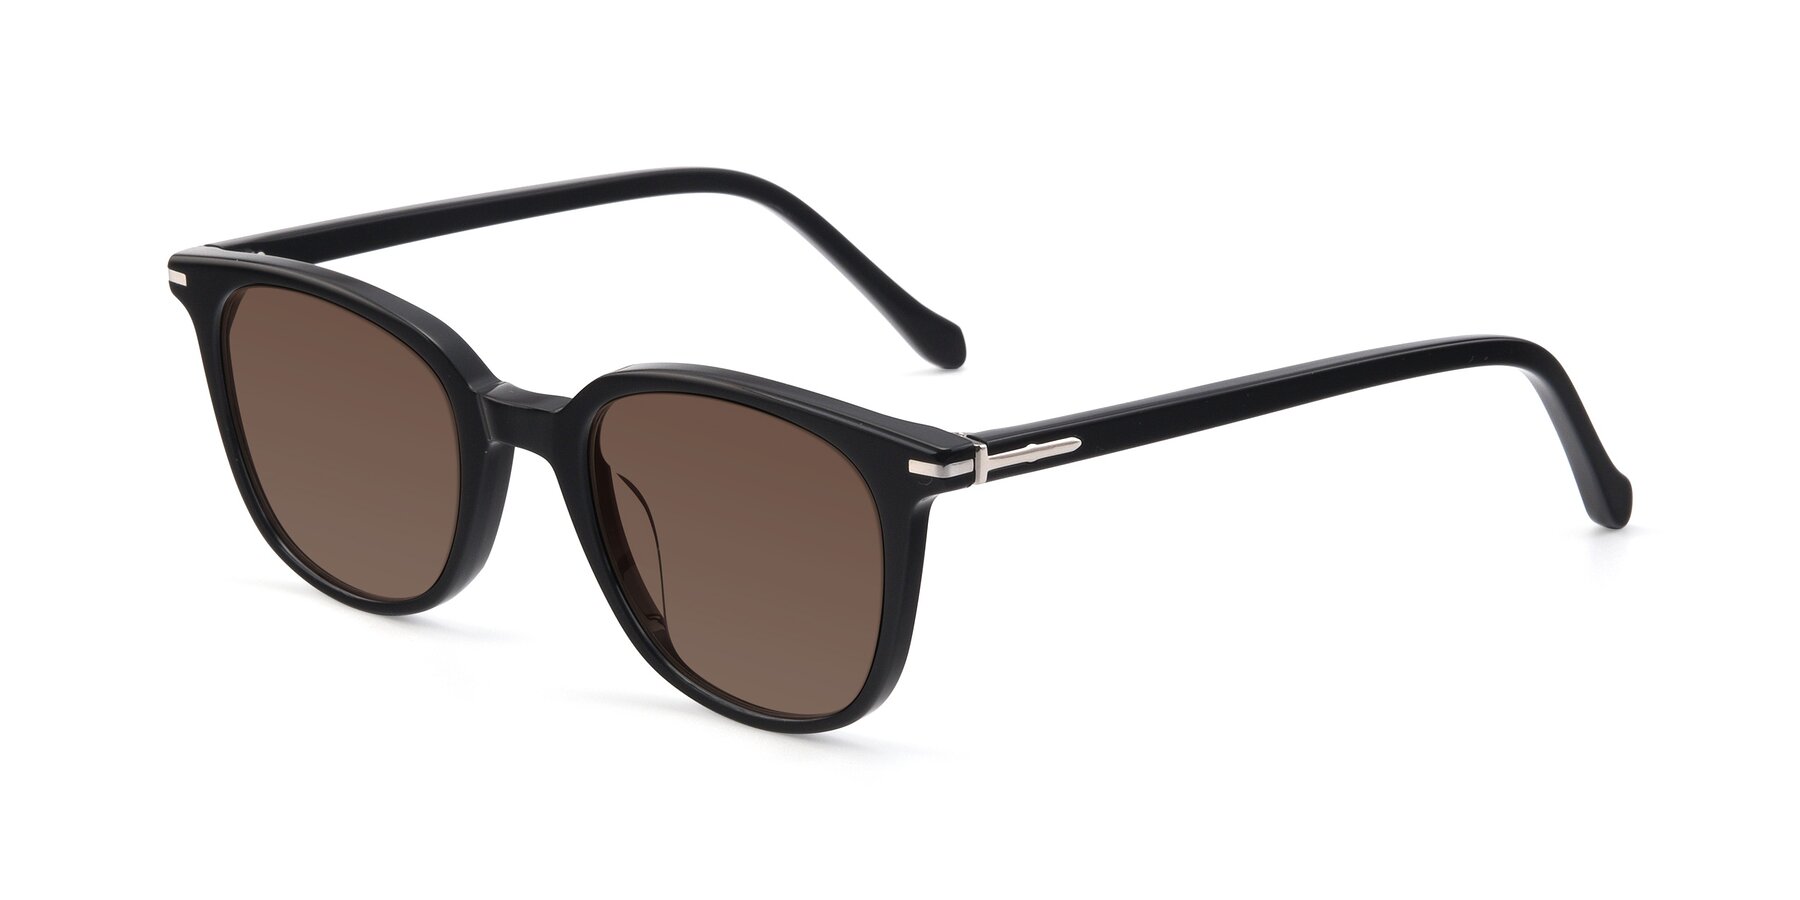 Angle of 17562 in Black with Brown Tinted Lenses